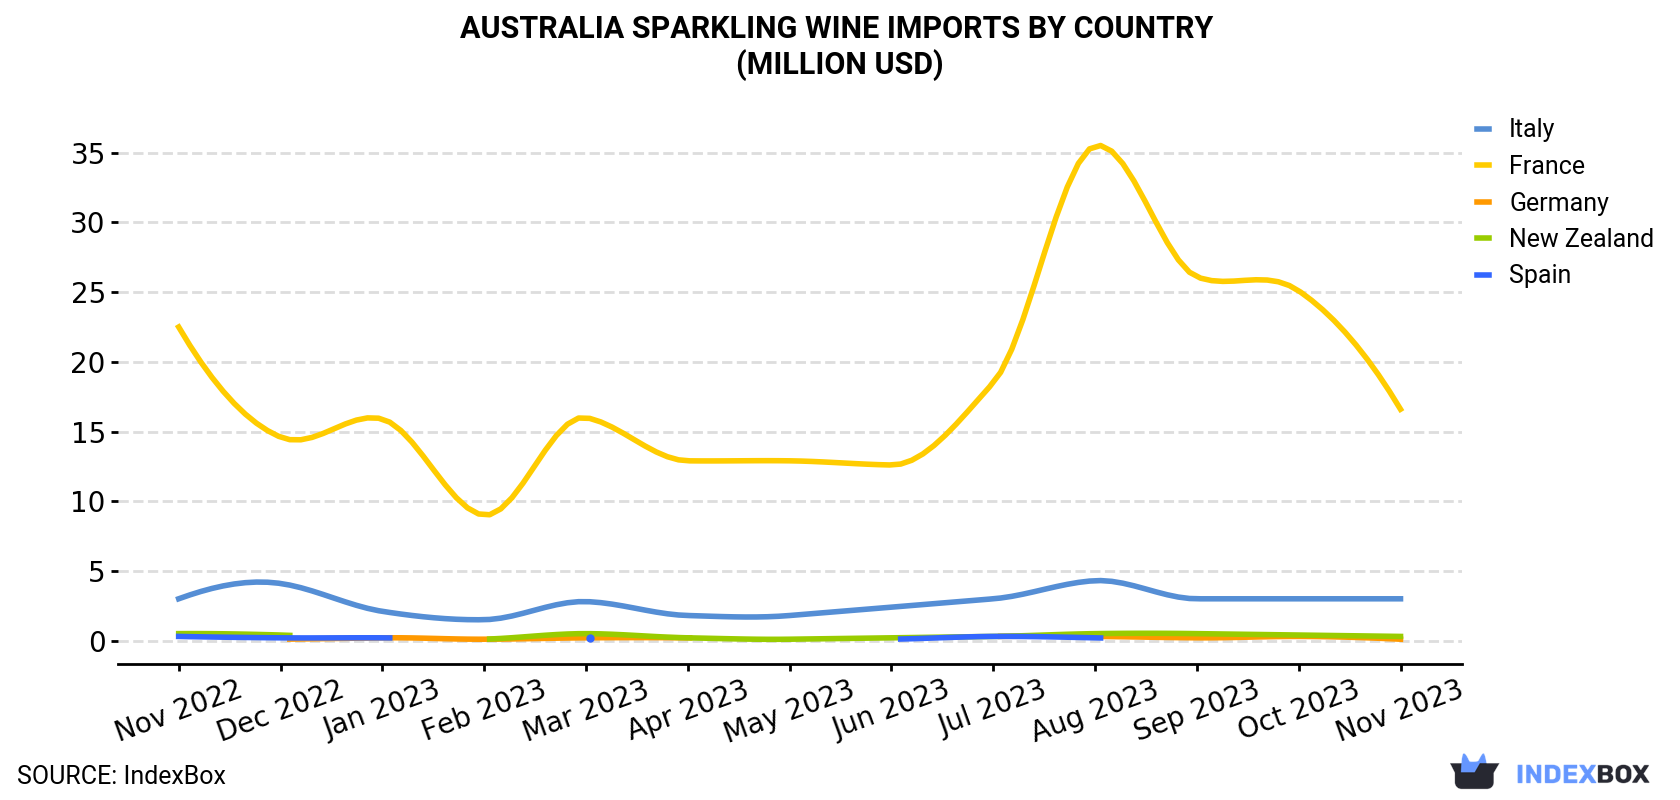 Australia Sparkling Wine Imports By Country (Million USD)